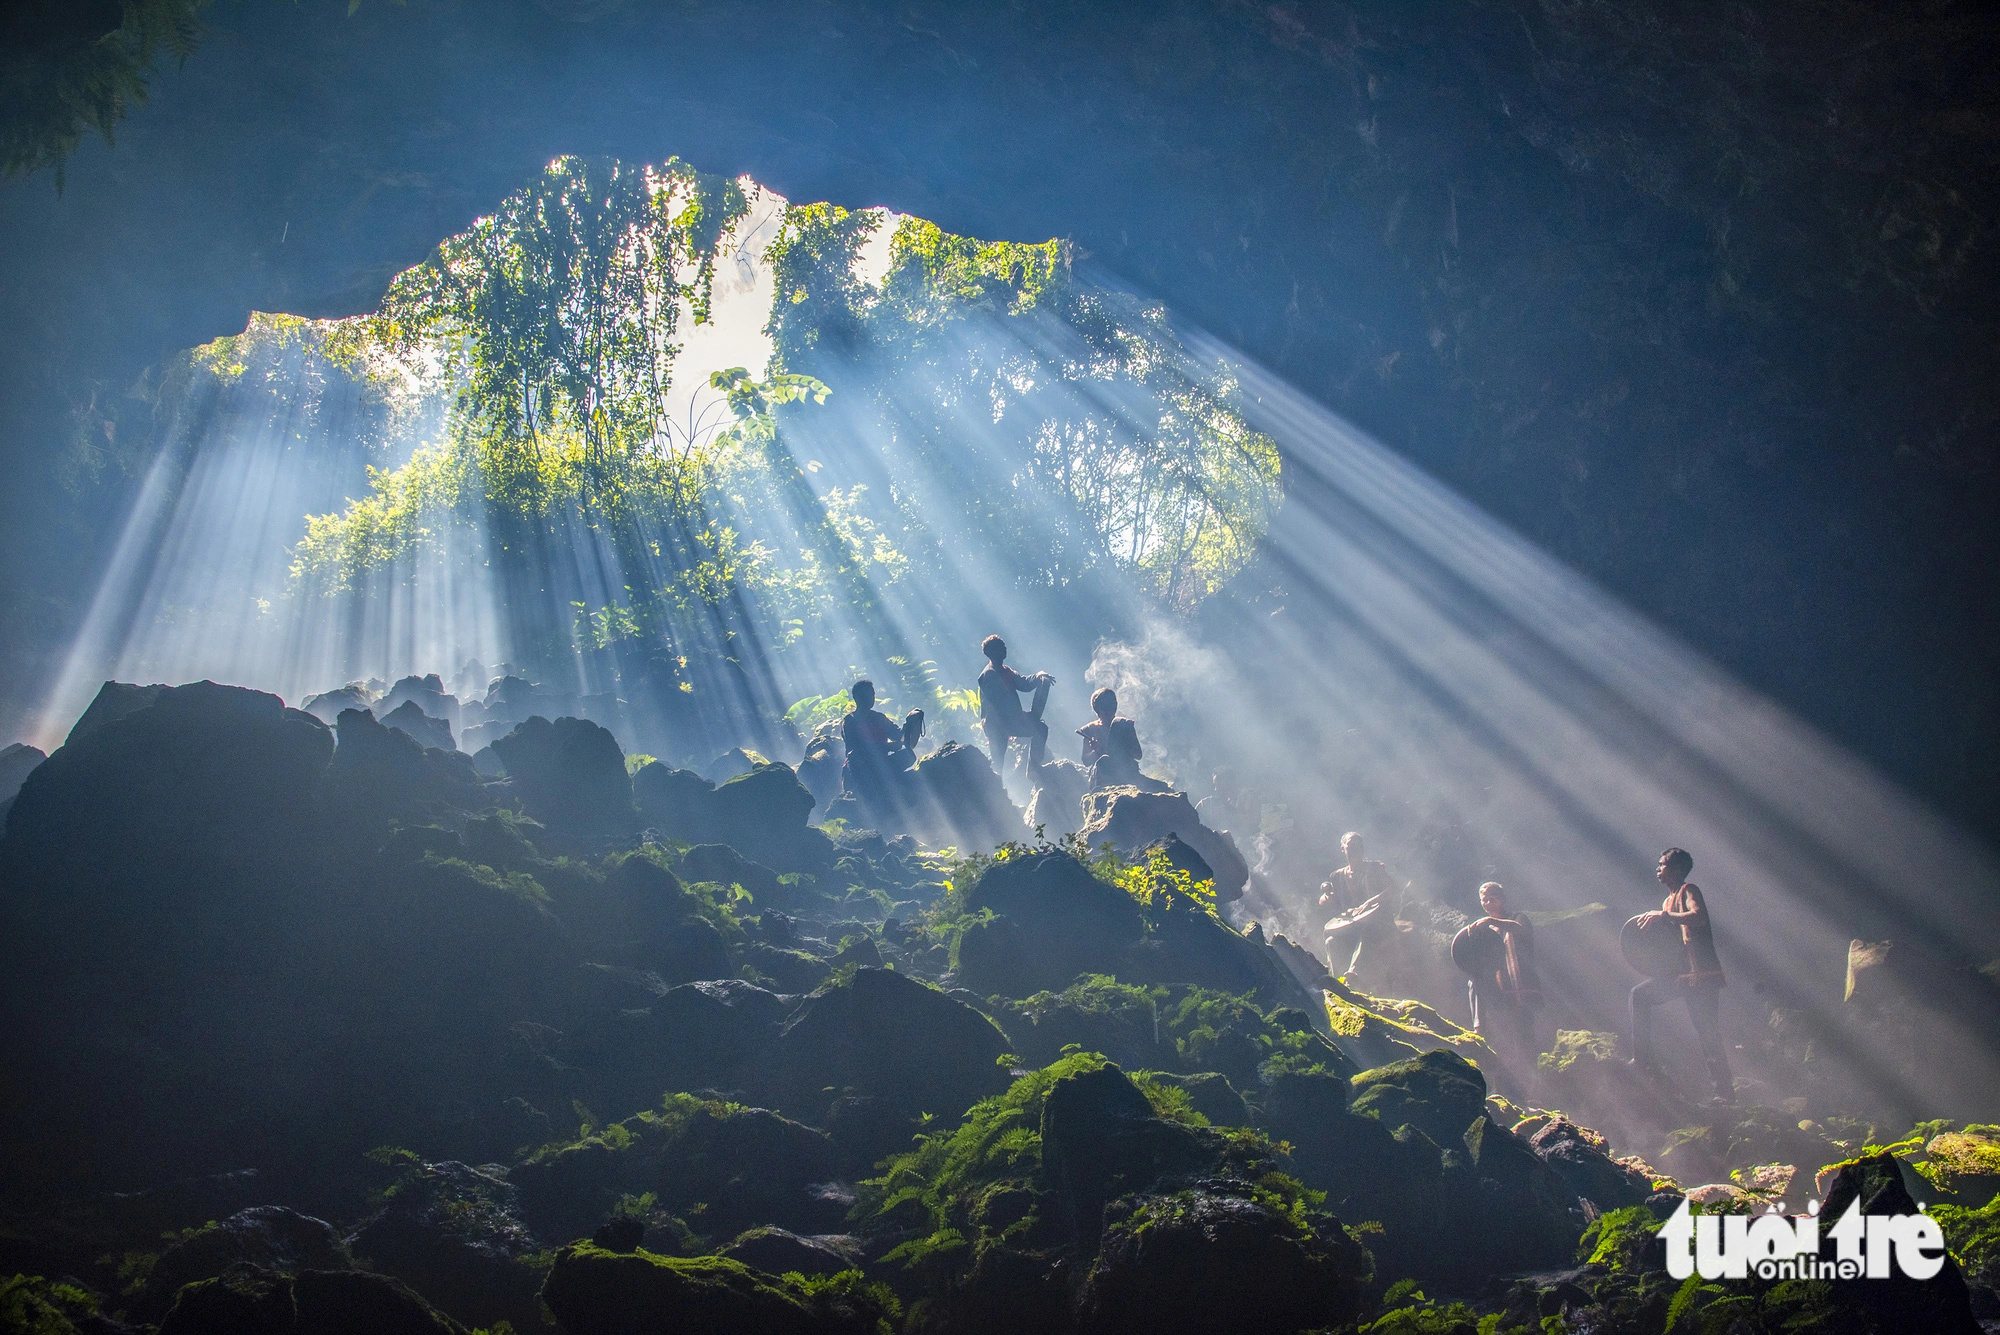 People are seen in a cave system in Krong No District, Dak Nong Province in Vietnam’s Central Highlands region. Photo: Tuoi Tre